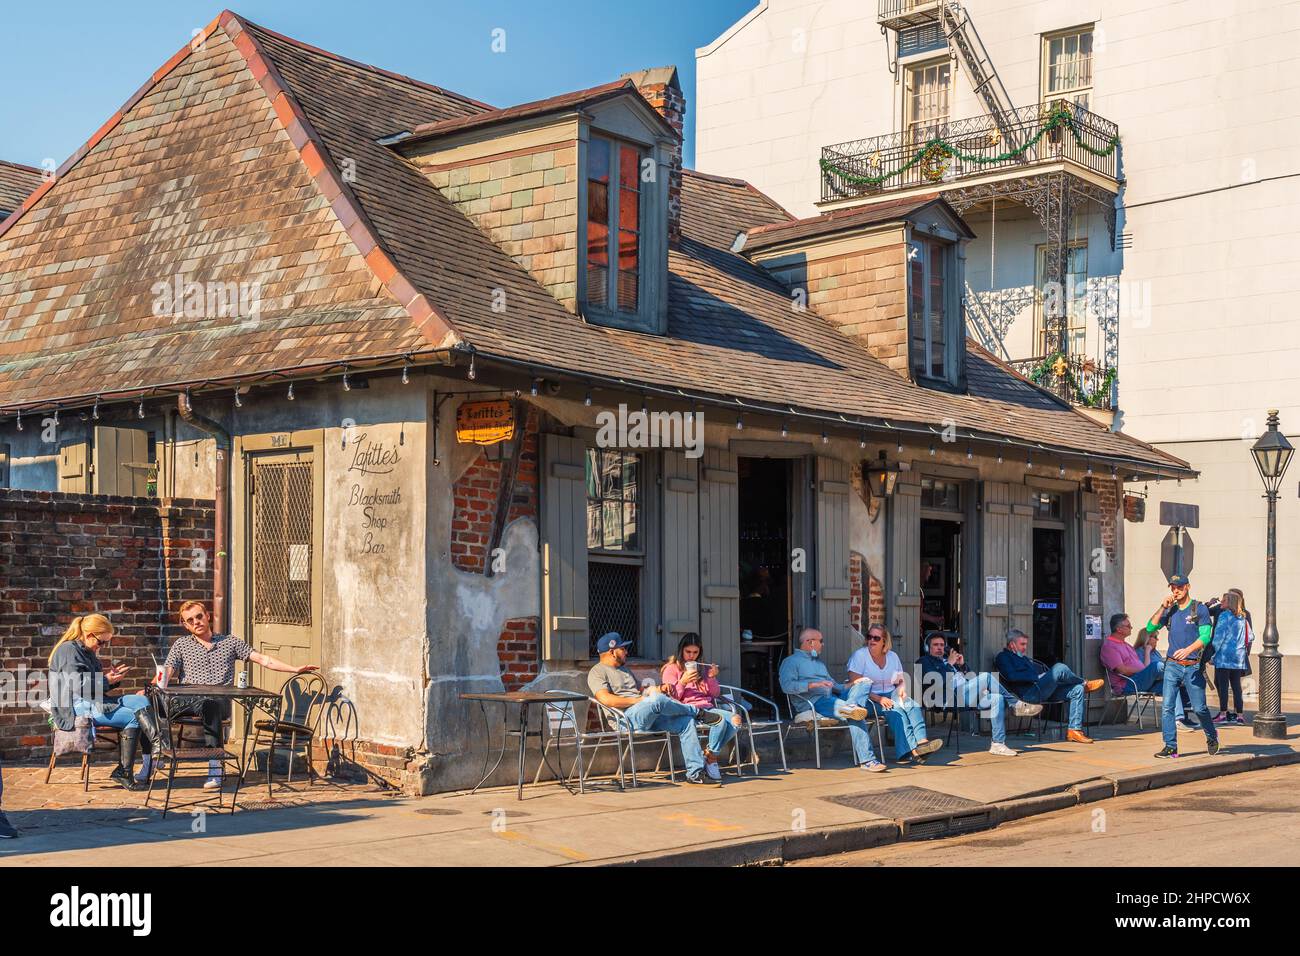 Lafitte’s Blacksmith Shop Bar at 941 Bourbon Street in the New Orleans French Quarter, Louisiana, USA. Stock Photo